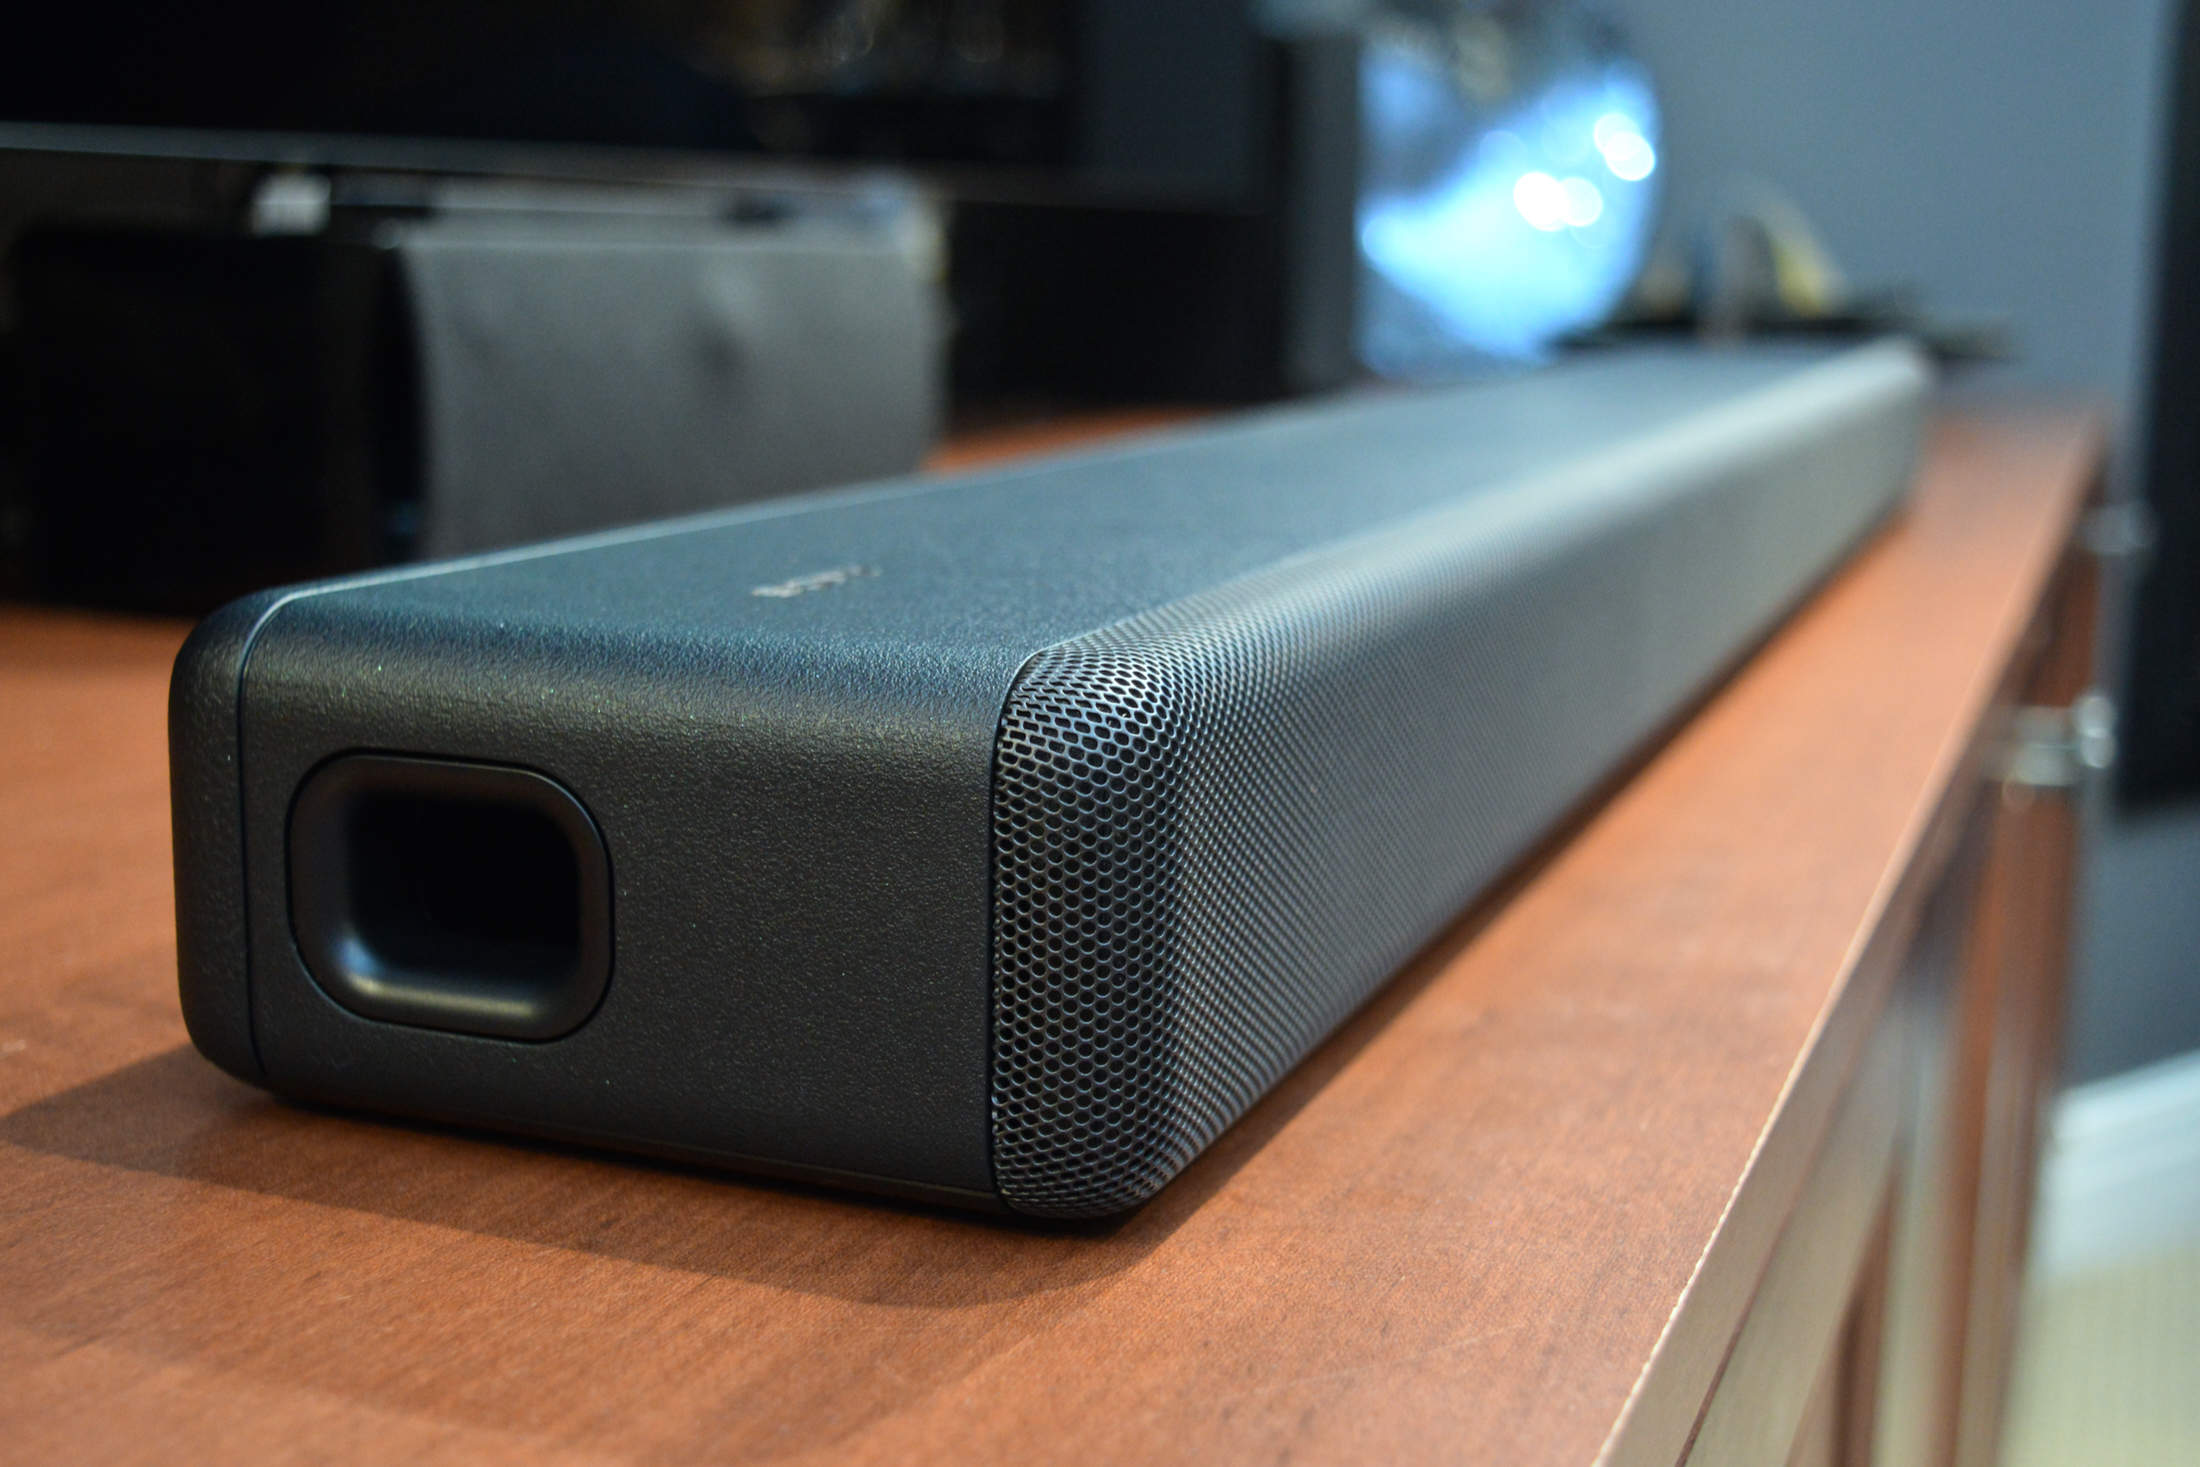 Master diploma Spreekwoord tevredenheid Sony HT-A3000 review: Packed with features but very pricey | Digital Trends